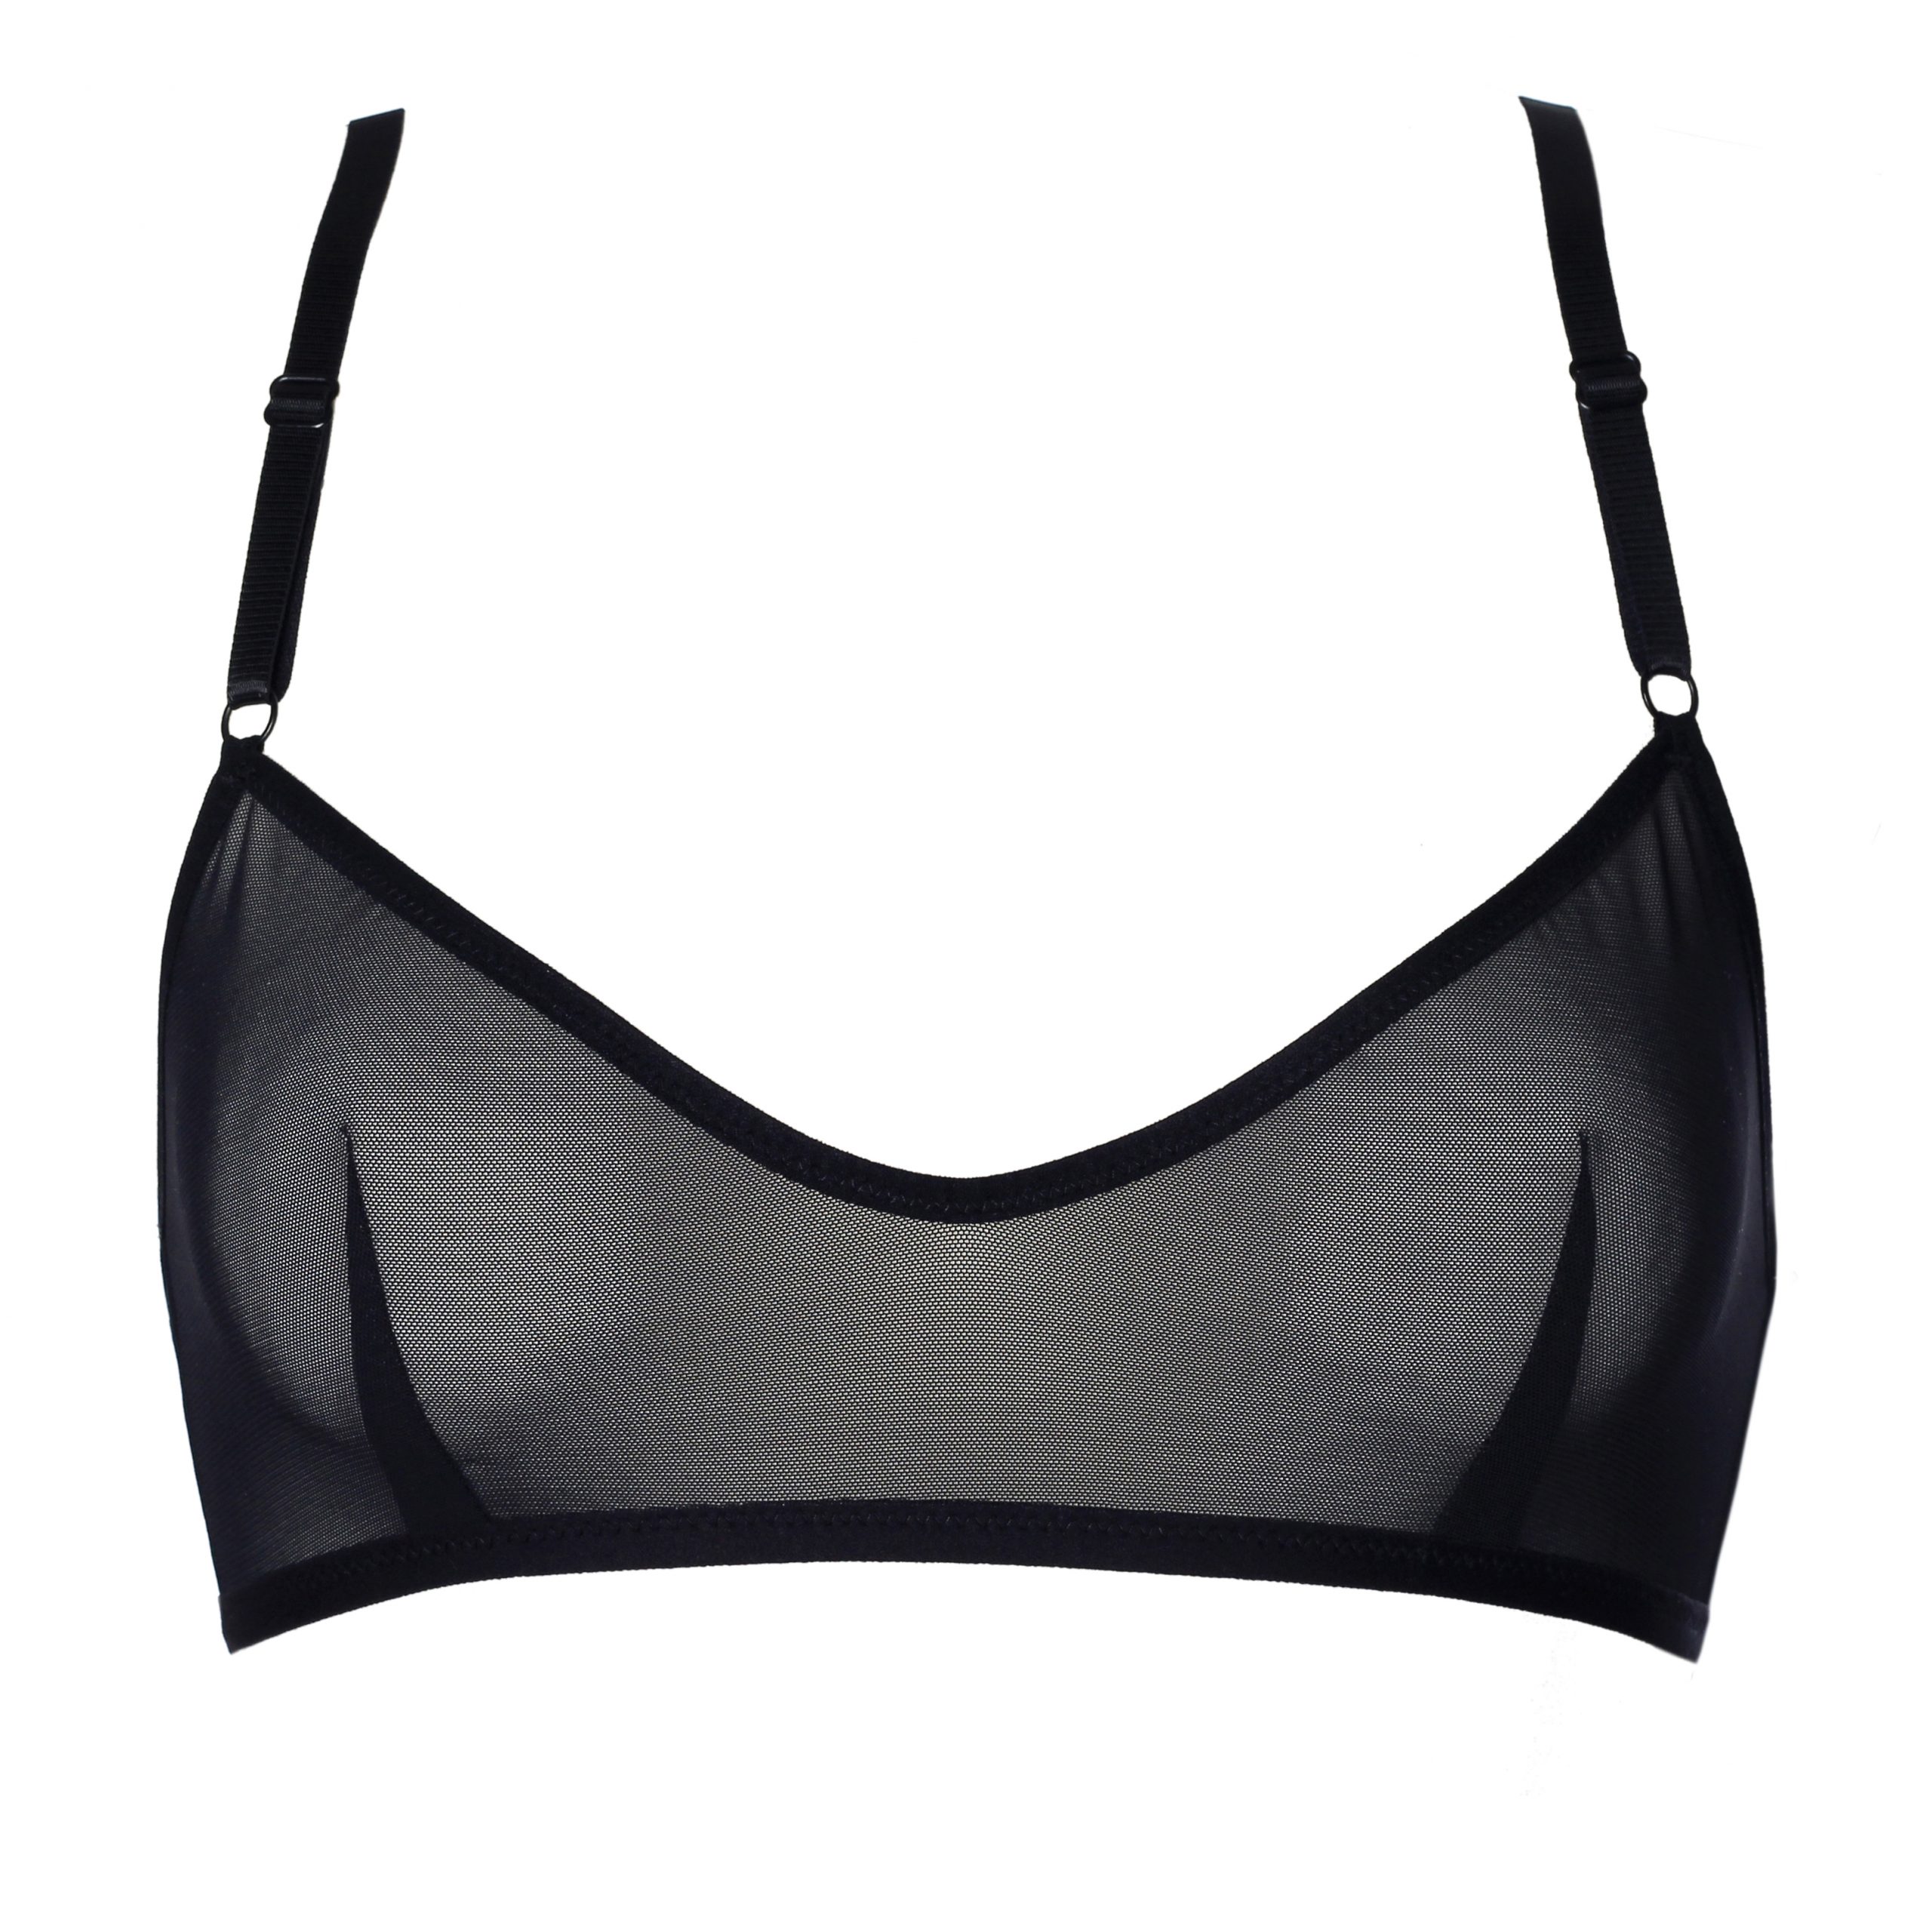 Black Mesh Bralette by Flash you and me Lingerie